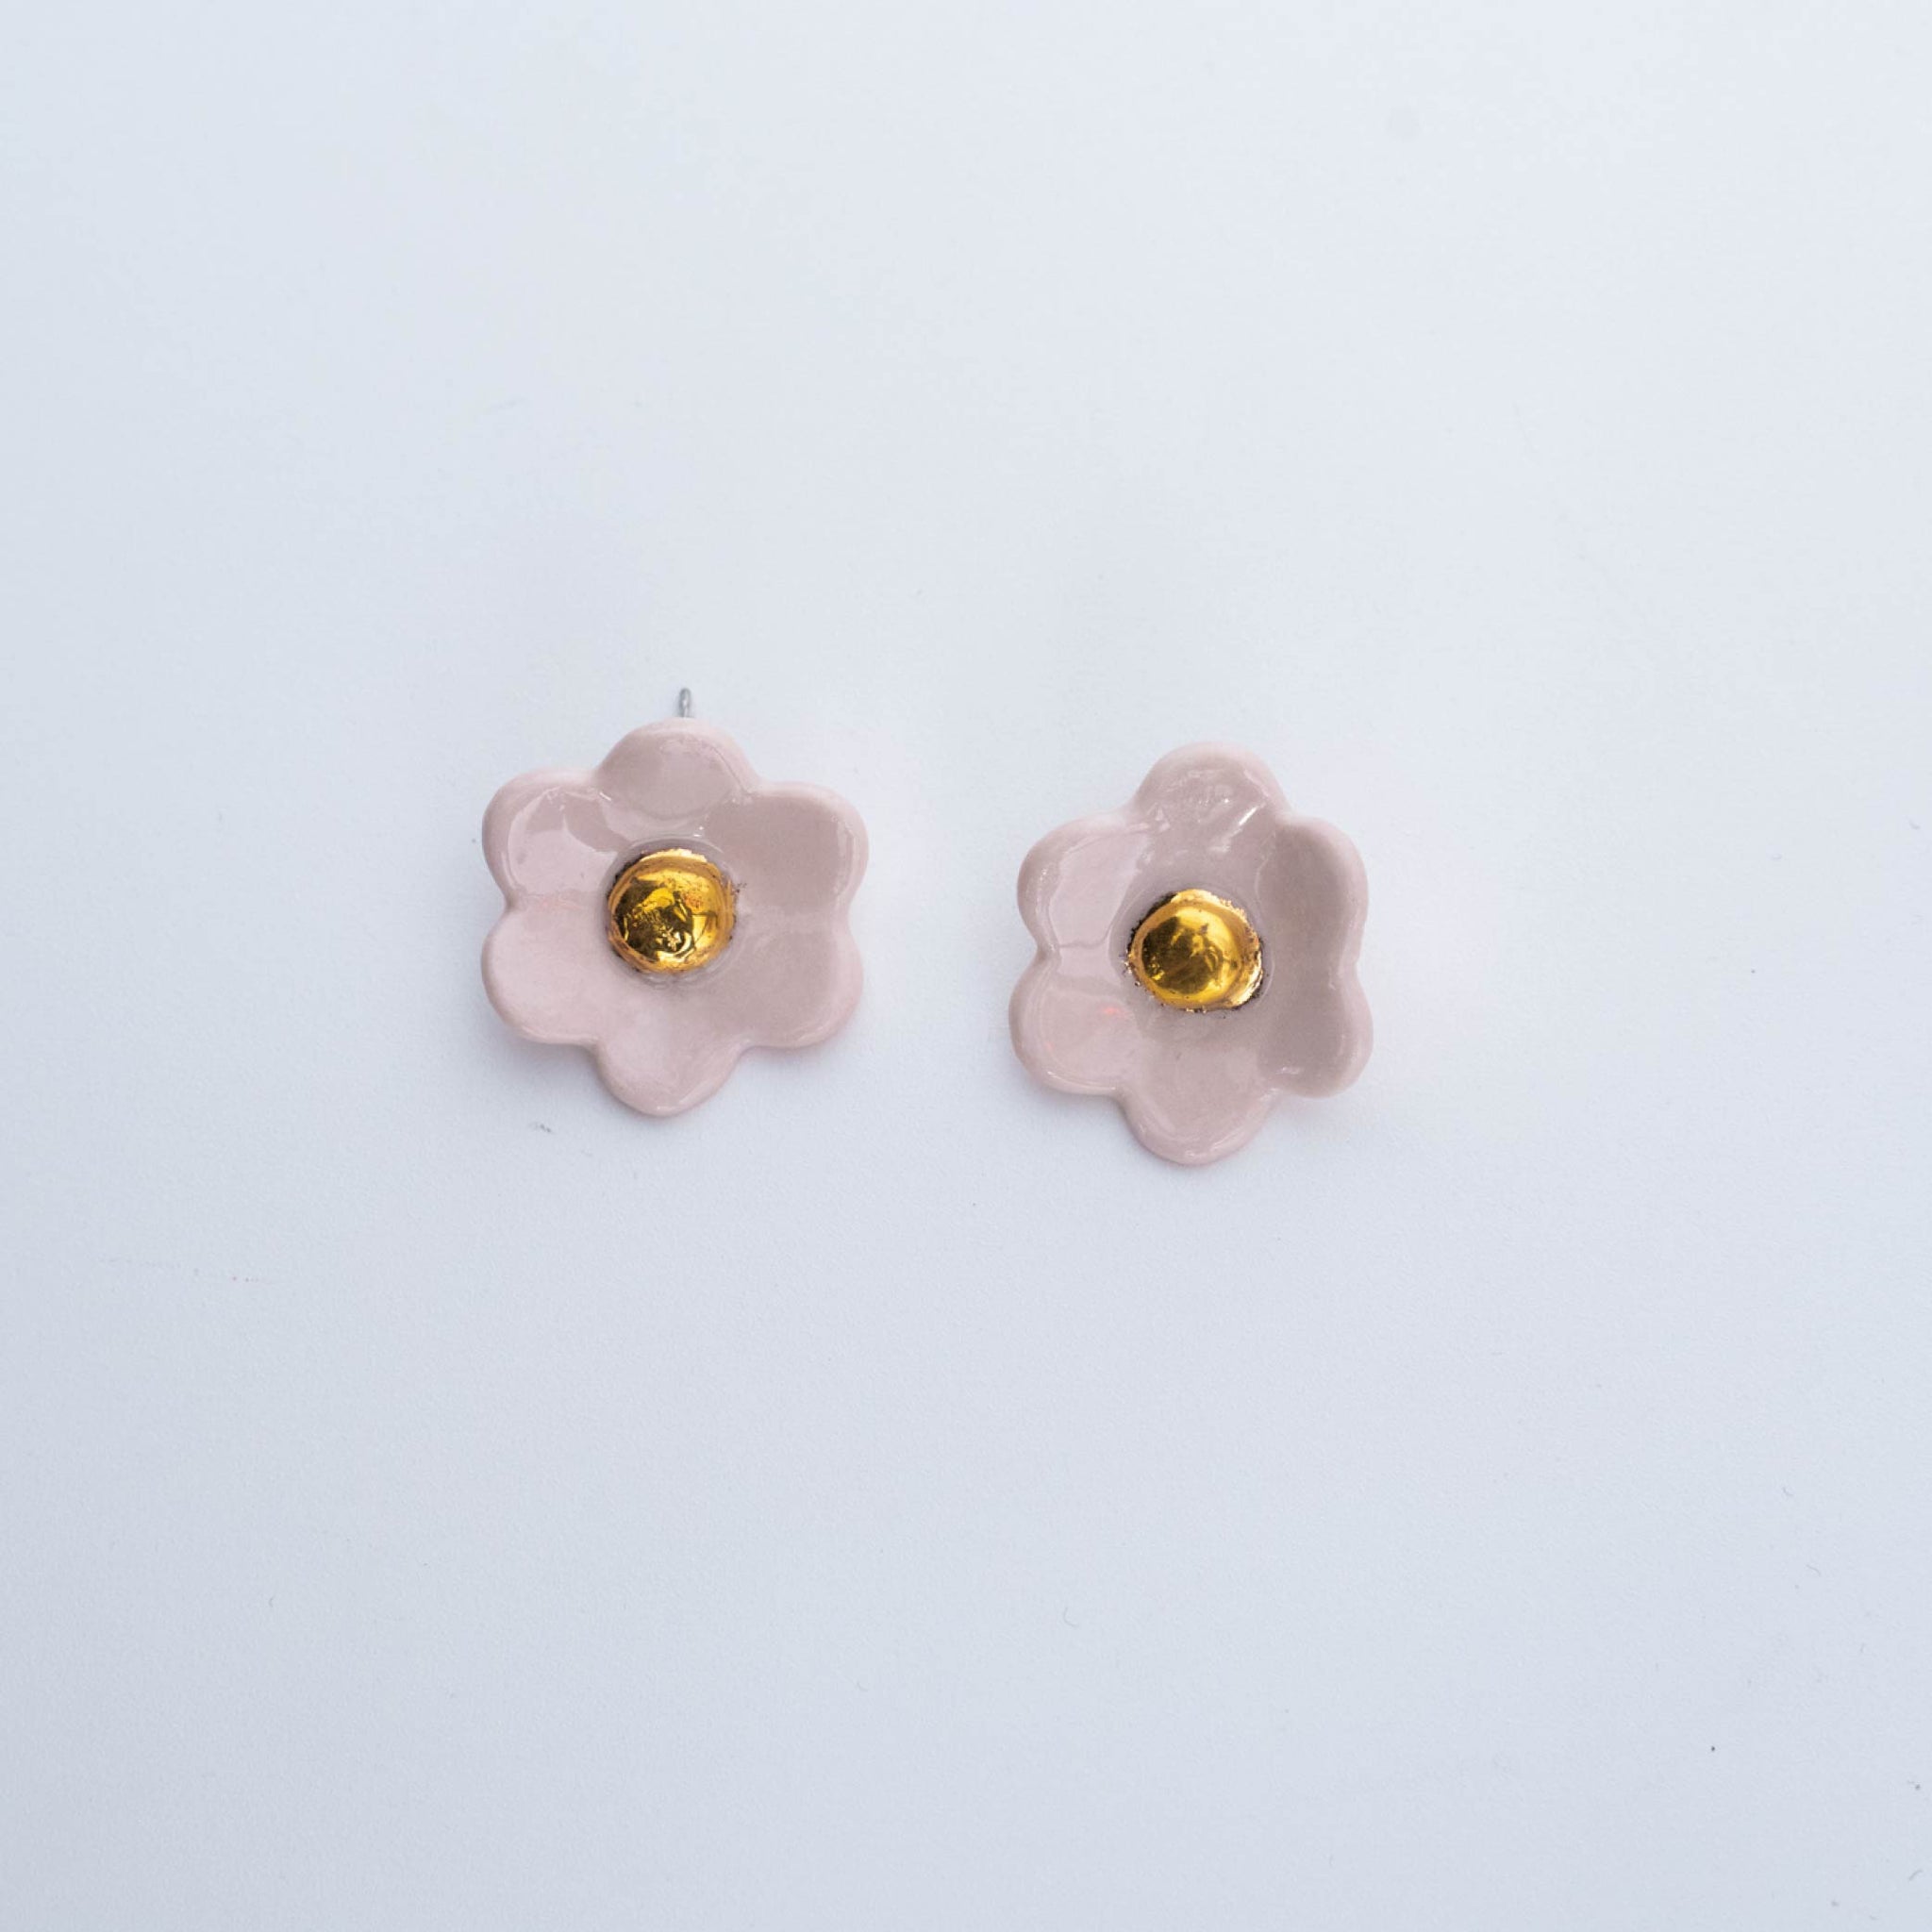 FLORY EARRINGS - Bright Gold